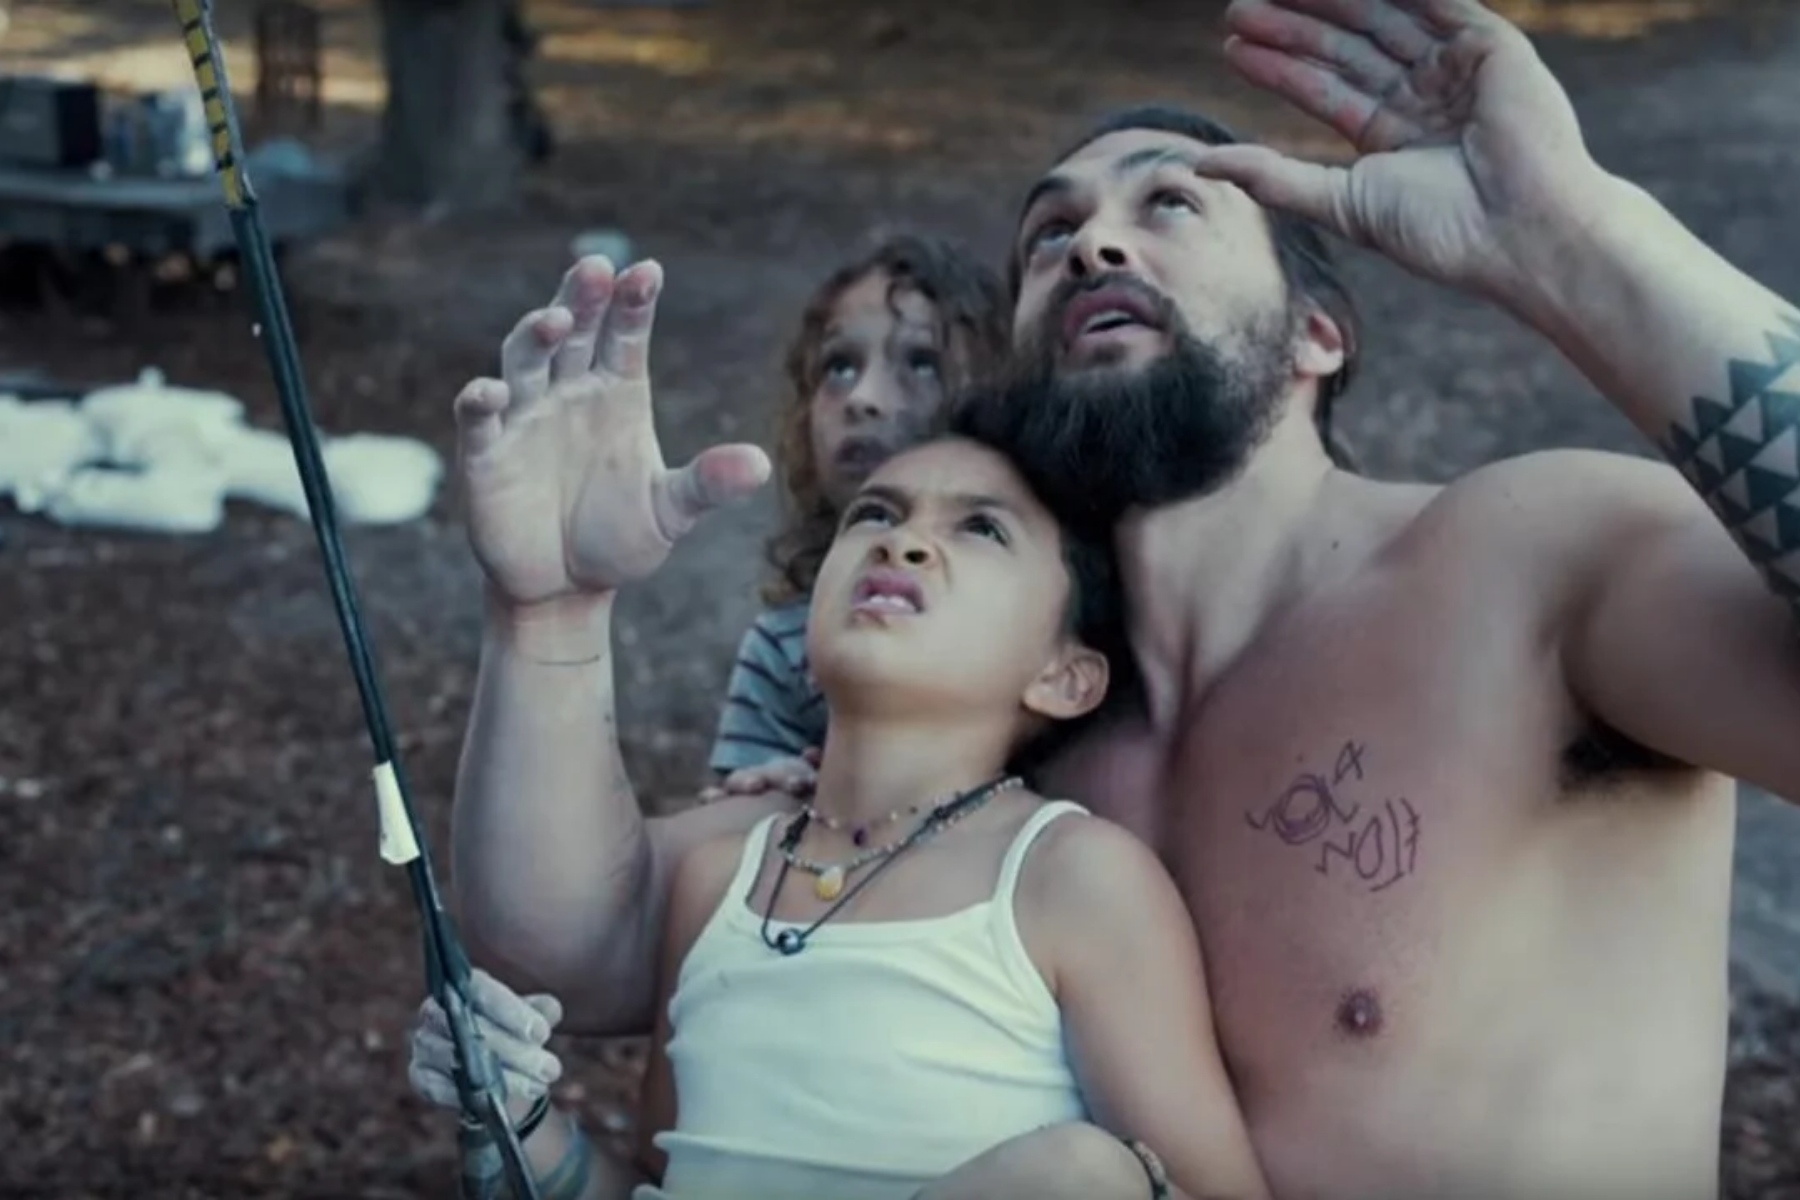 Jason Momoa appears in the short film 'Canvas of My Life' with her daughter Lola Iolani and son Nakoa-Wolf Manakauapo Namakaeha